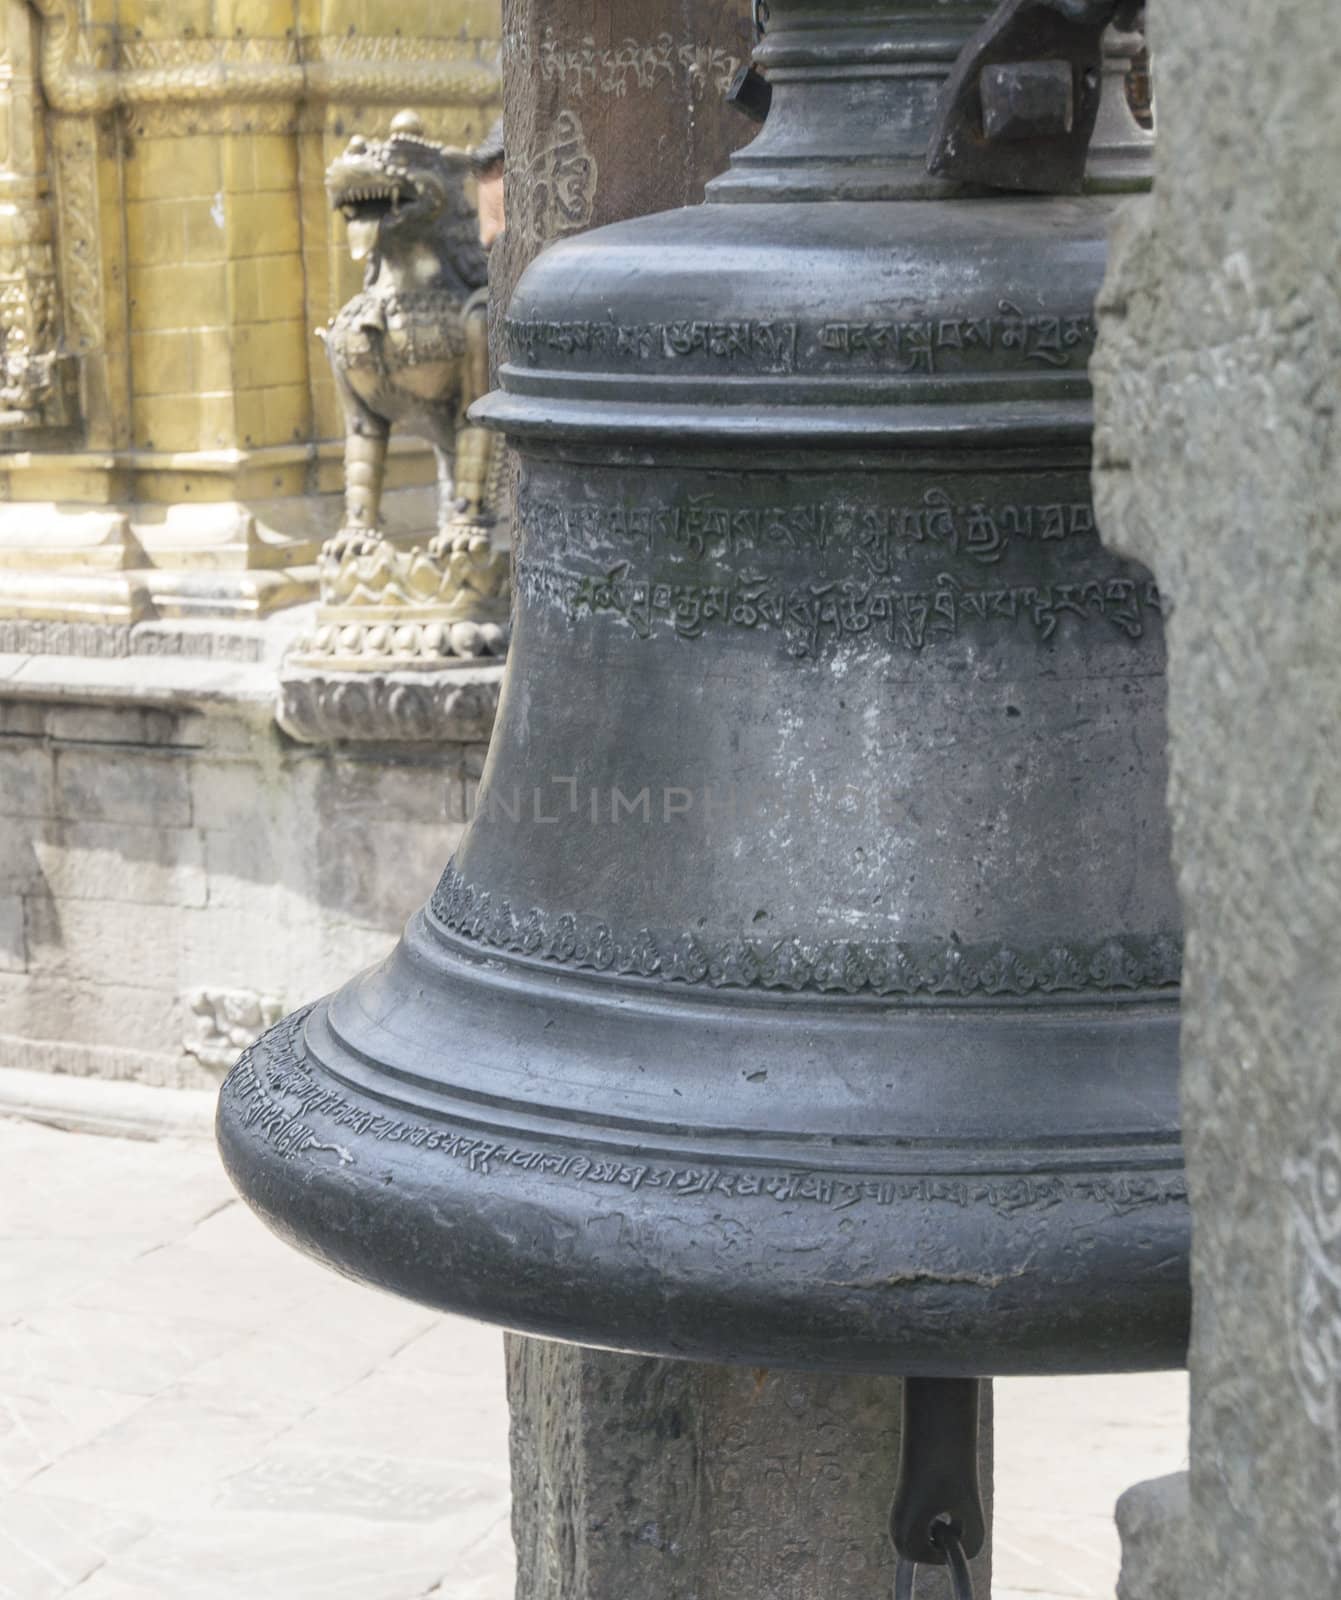 metal bell in buddhistic temple in nepal by gewoldi